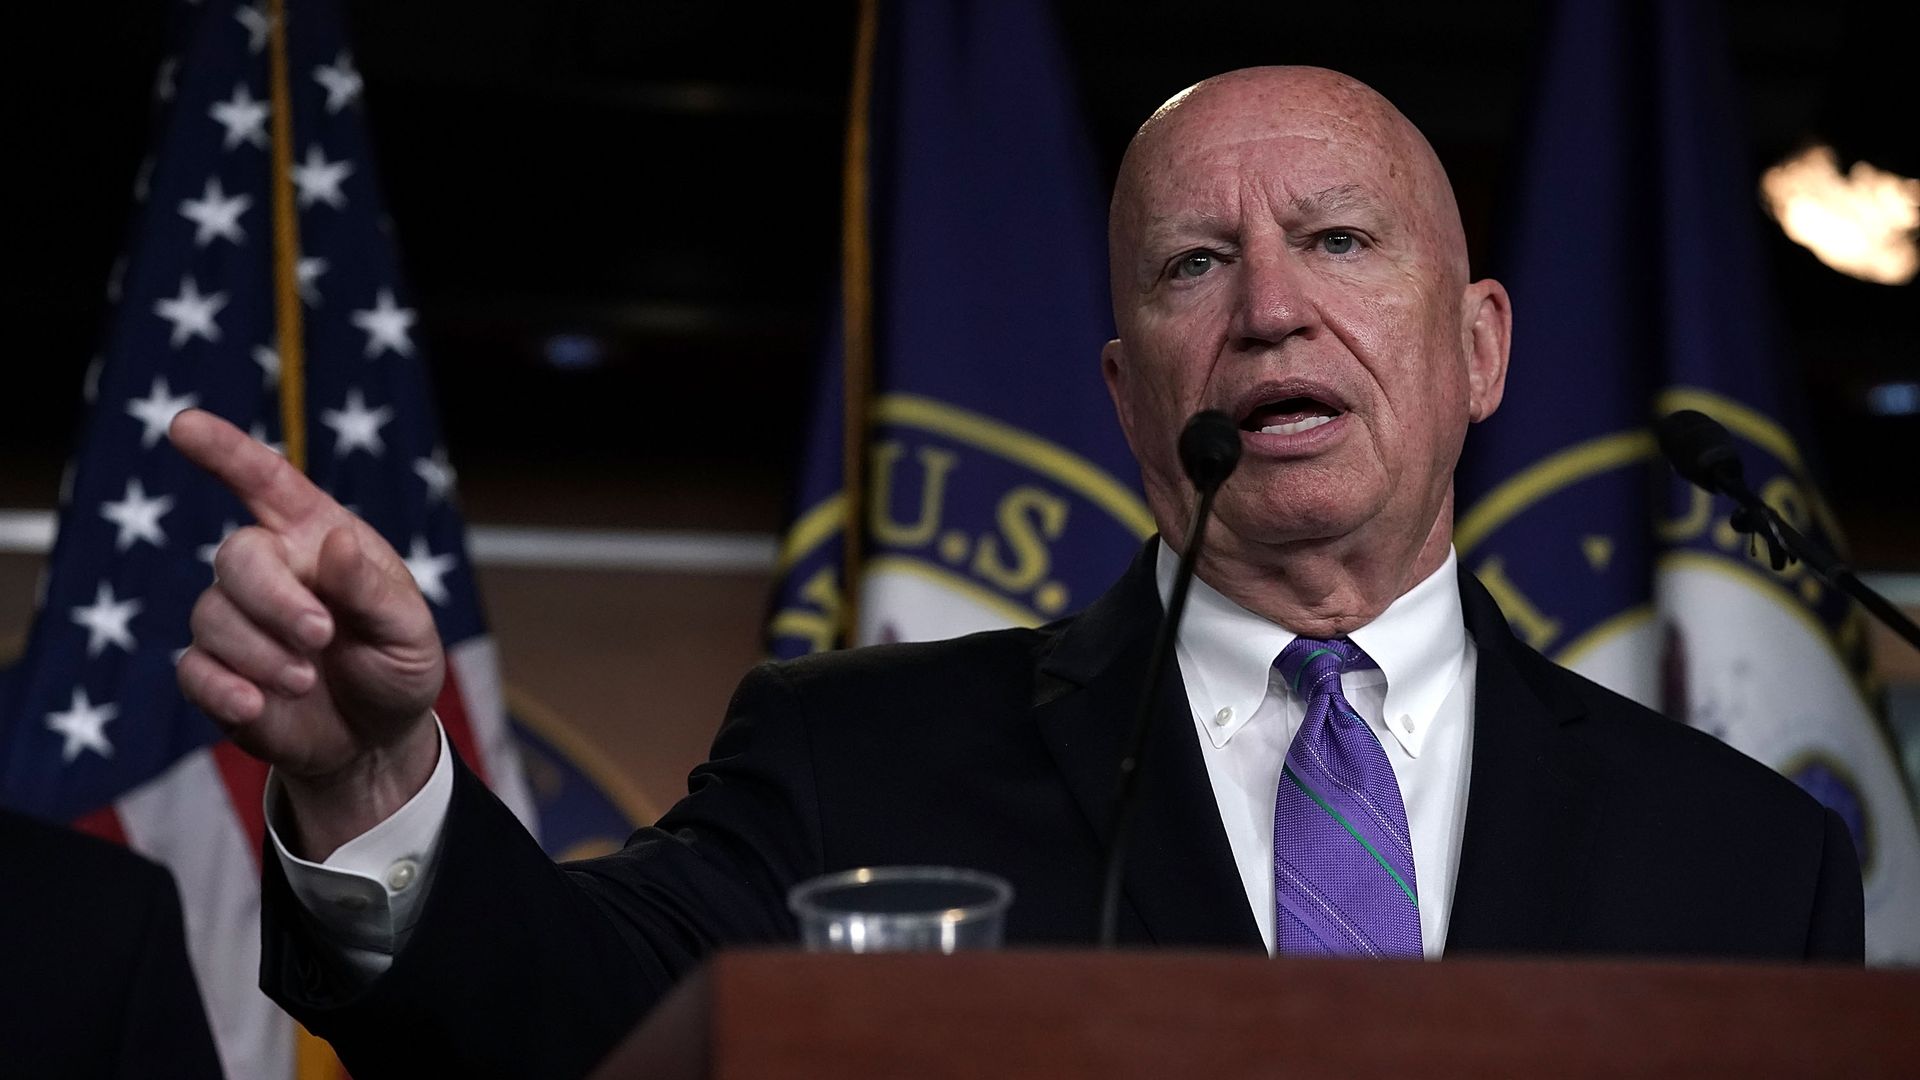 House Ways and Means Committee Chair Kevin Brady (R-TX) speaks during a news conference June 20, 2018 on Capitol Hill